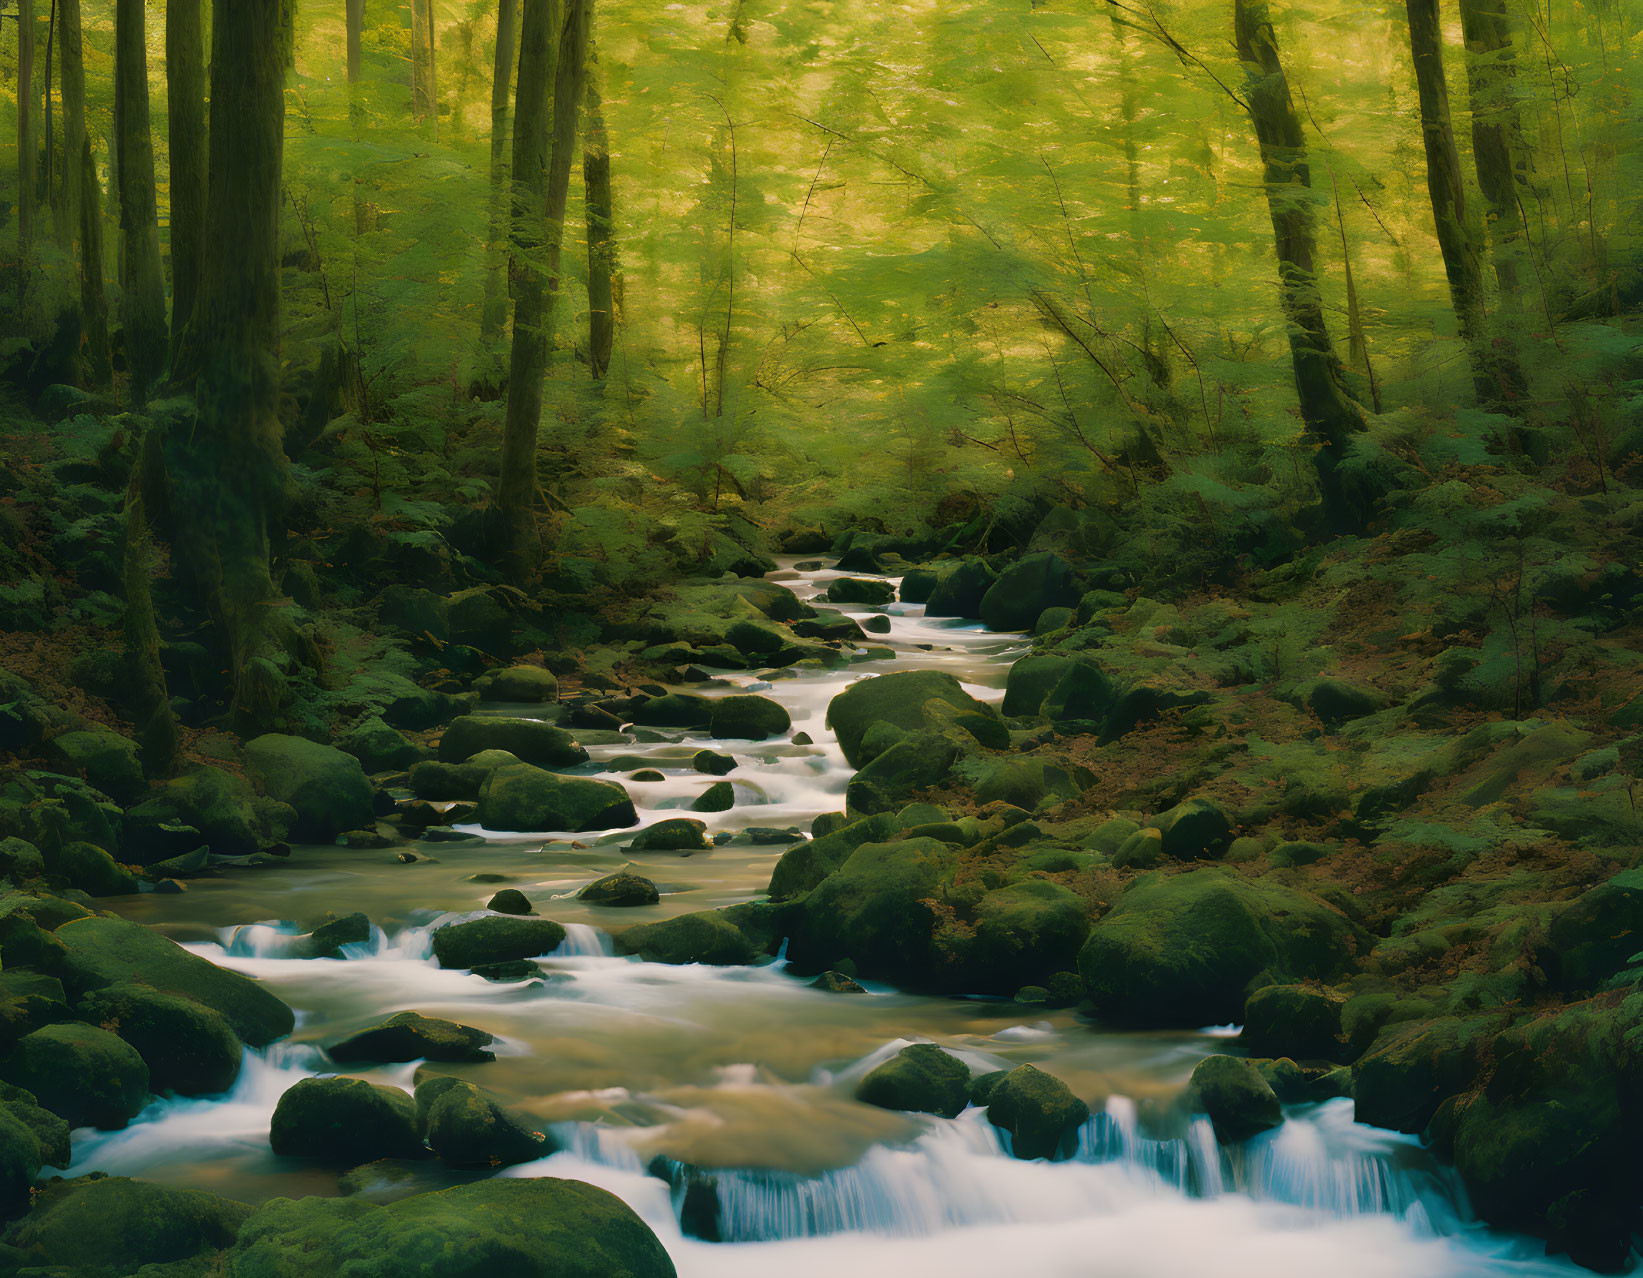 Tranquil forest scene with cascading stream and lush green trees